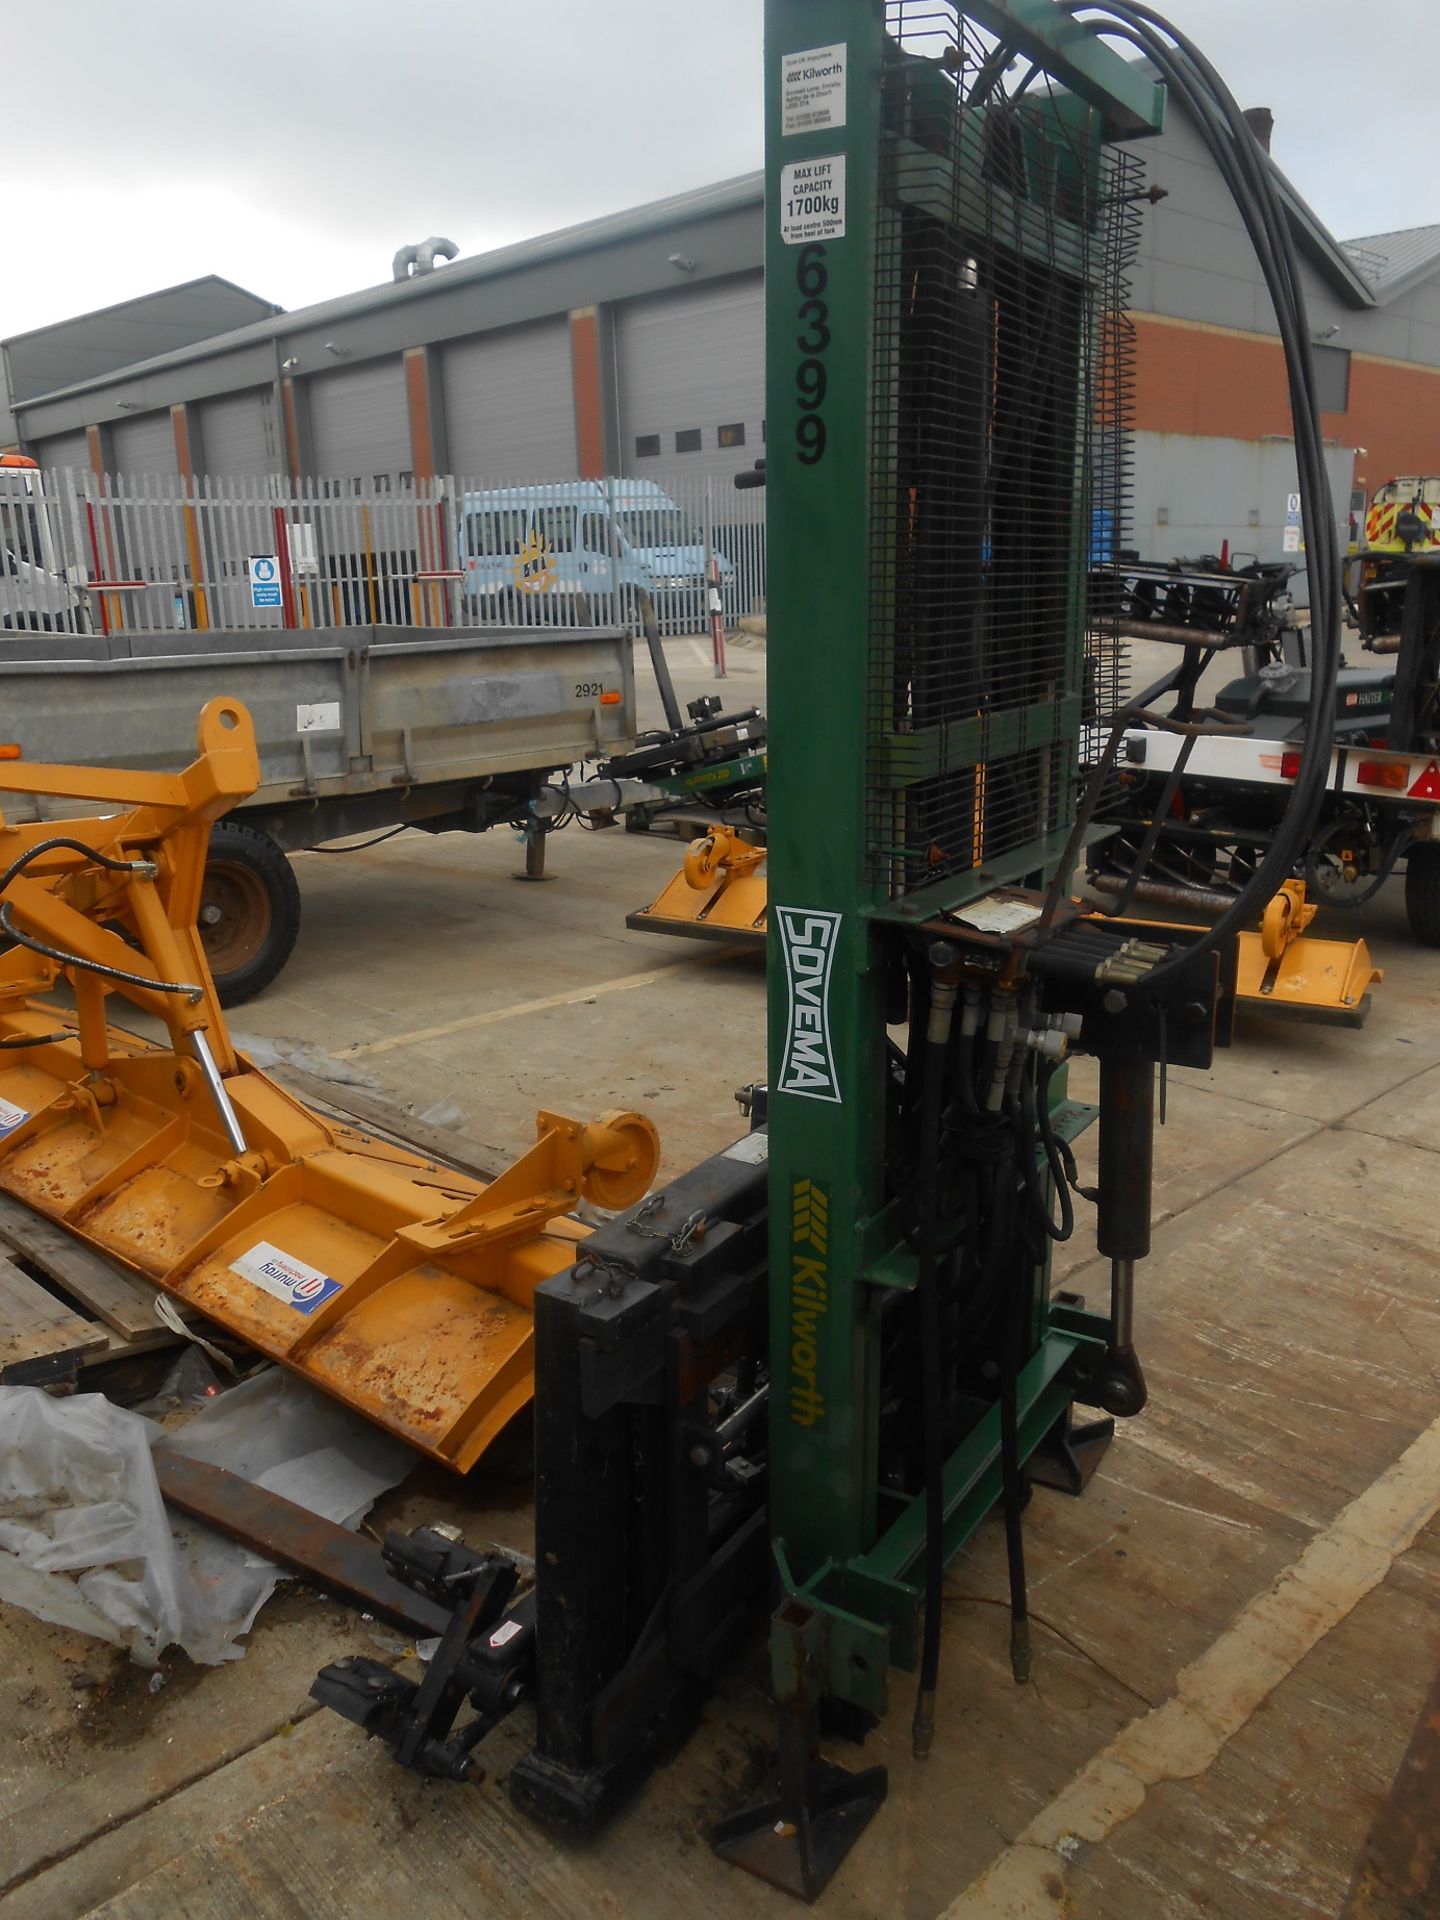 KILWORTH 3 POINT LINKAGE FORKLIFT c/w POST LIFTER DIRECT LOCAL AUTHORITY - Image 3 of 3